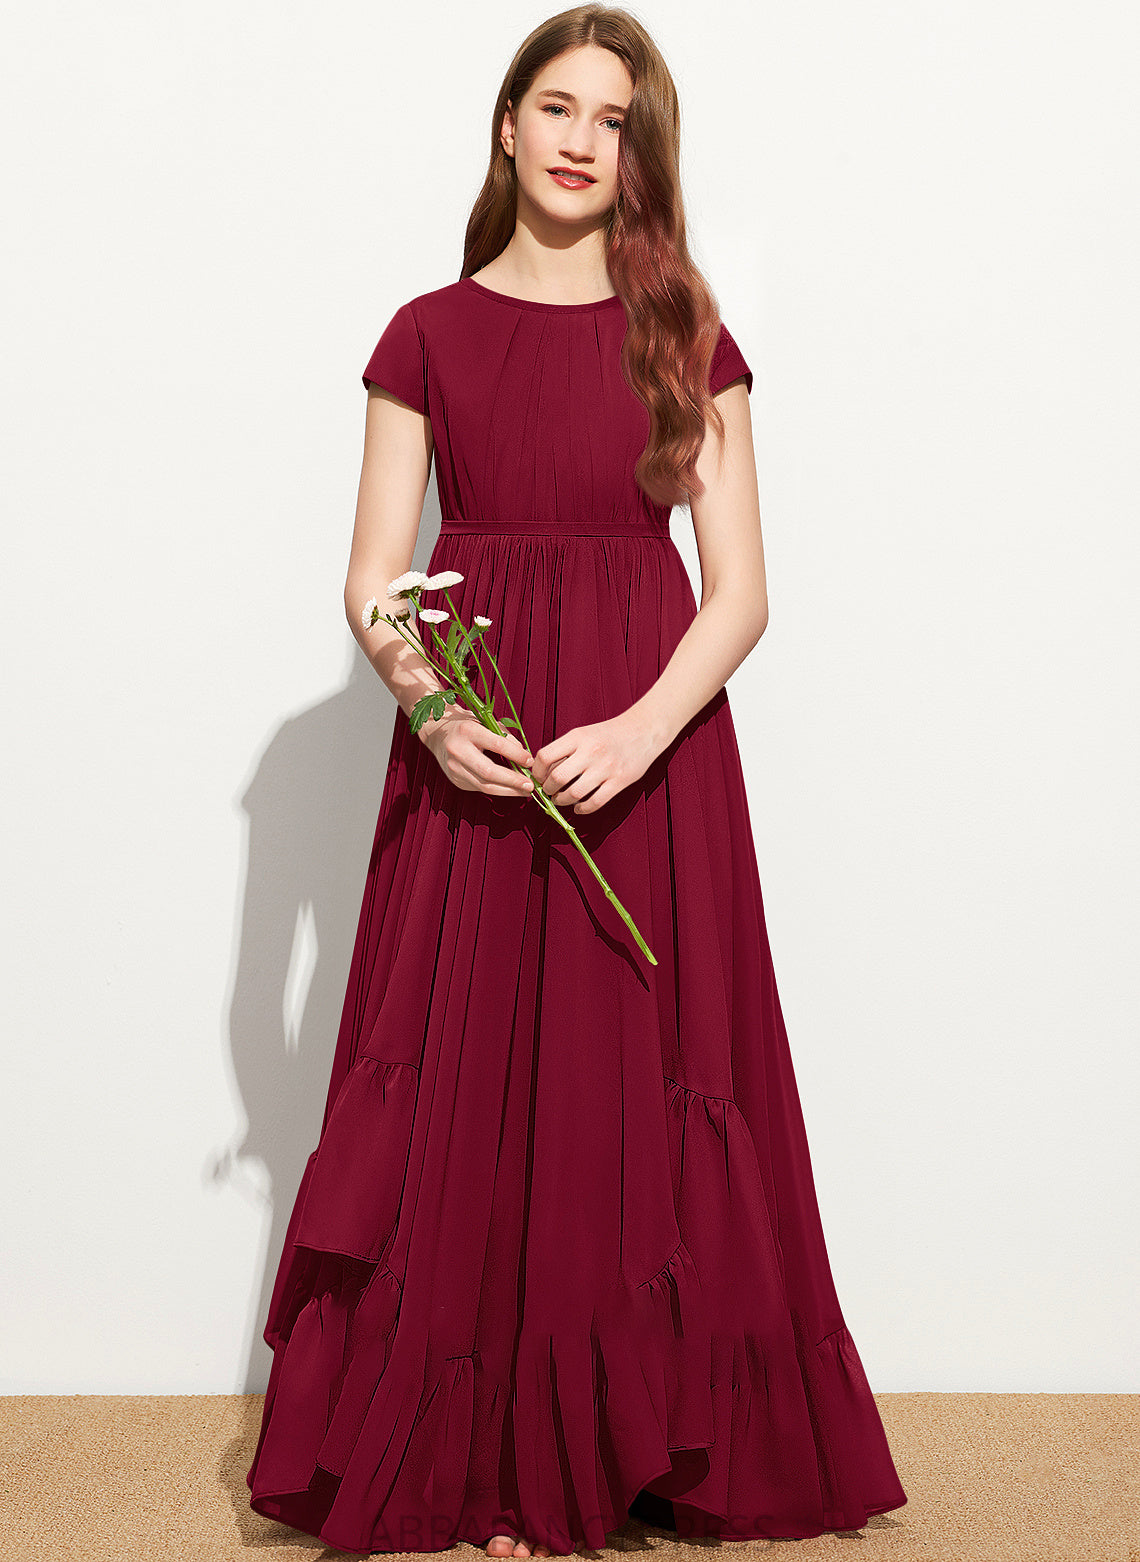 Junior Bridesmaid Dresses Bow(s) Ruffles Floor-Length Aylin A-Line Scoop With Cascading Chiffon Appliques Lace Neck